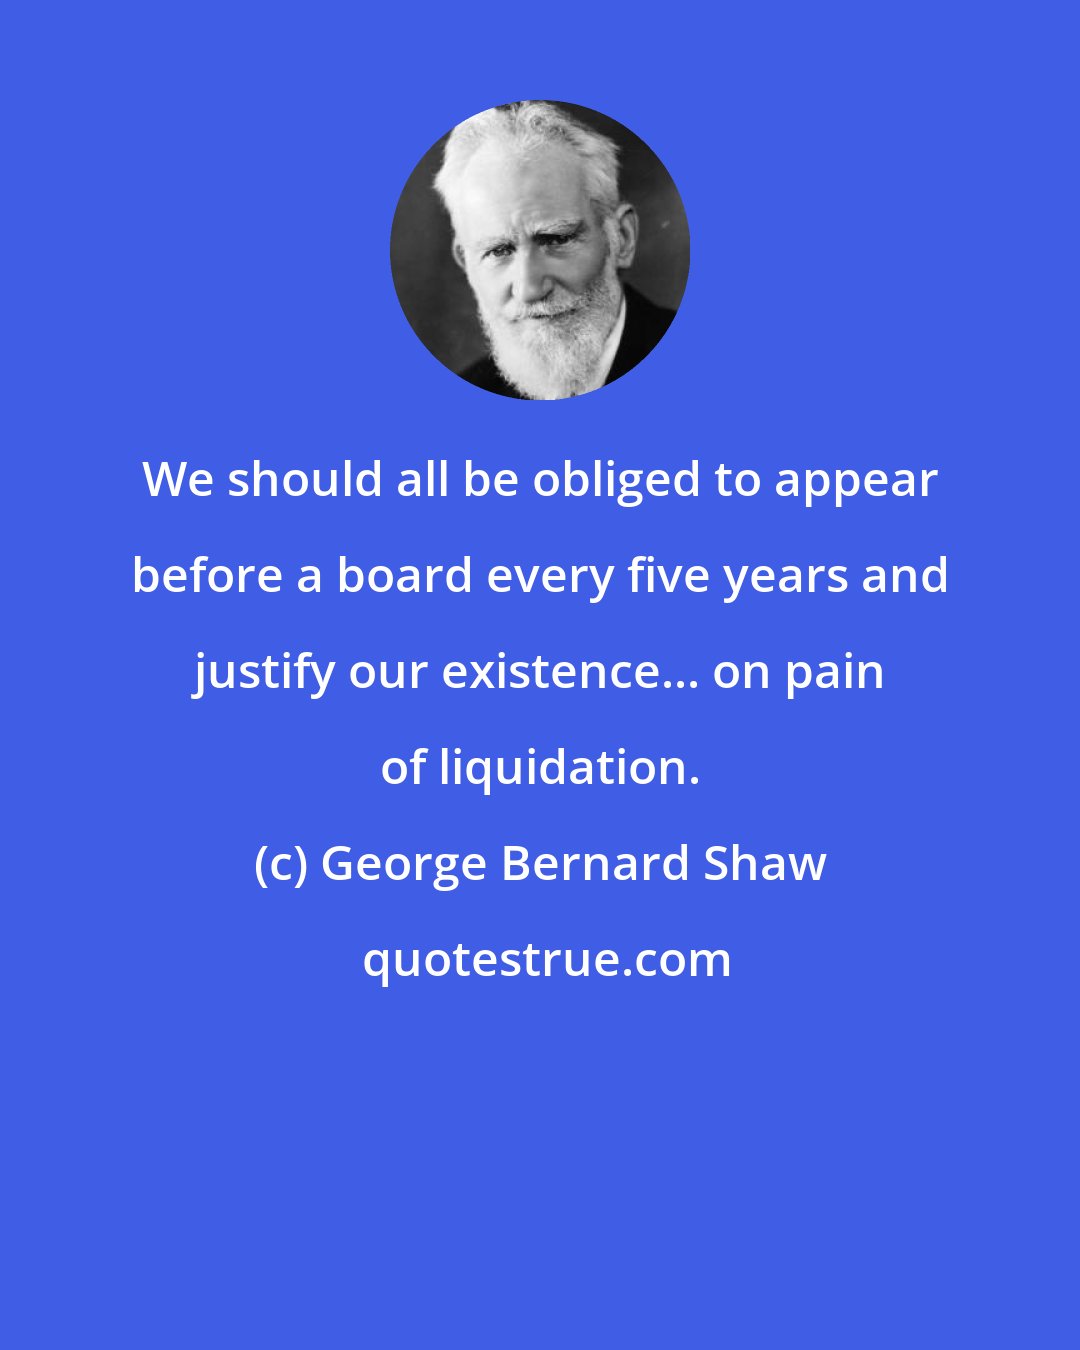 George Bernard Shaw: We should all be obliged to appear before a board every five years and justify our existence... on pain of liquidation.